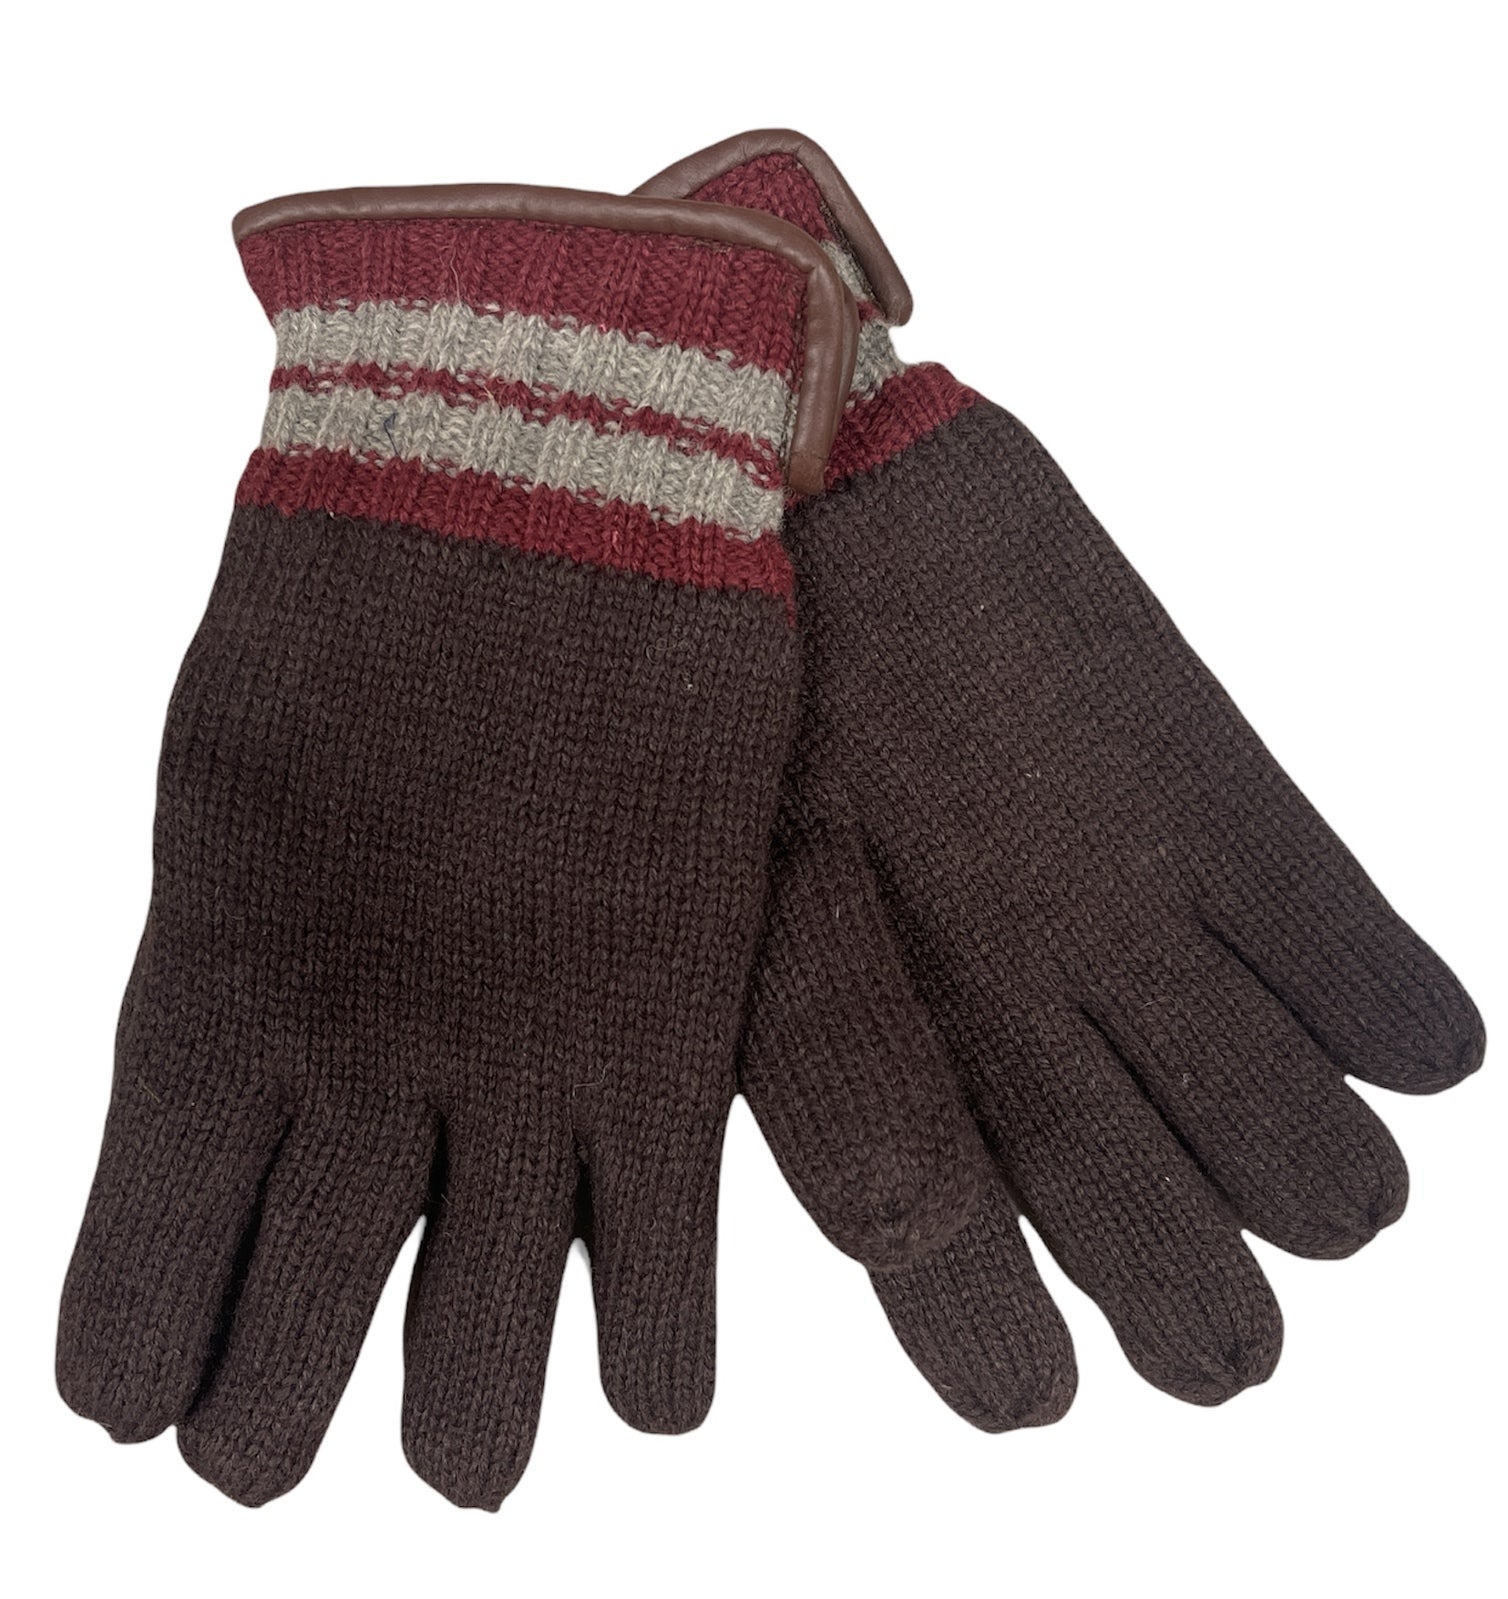 DENTS Wool Gloves Winter w/ Warm Fleece Insulated Thermal Knitted - Brown